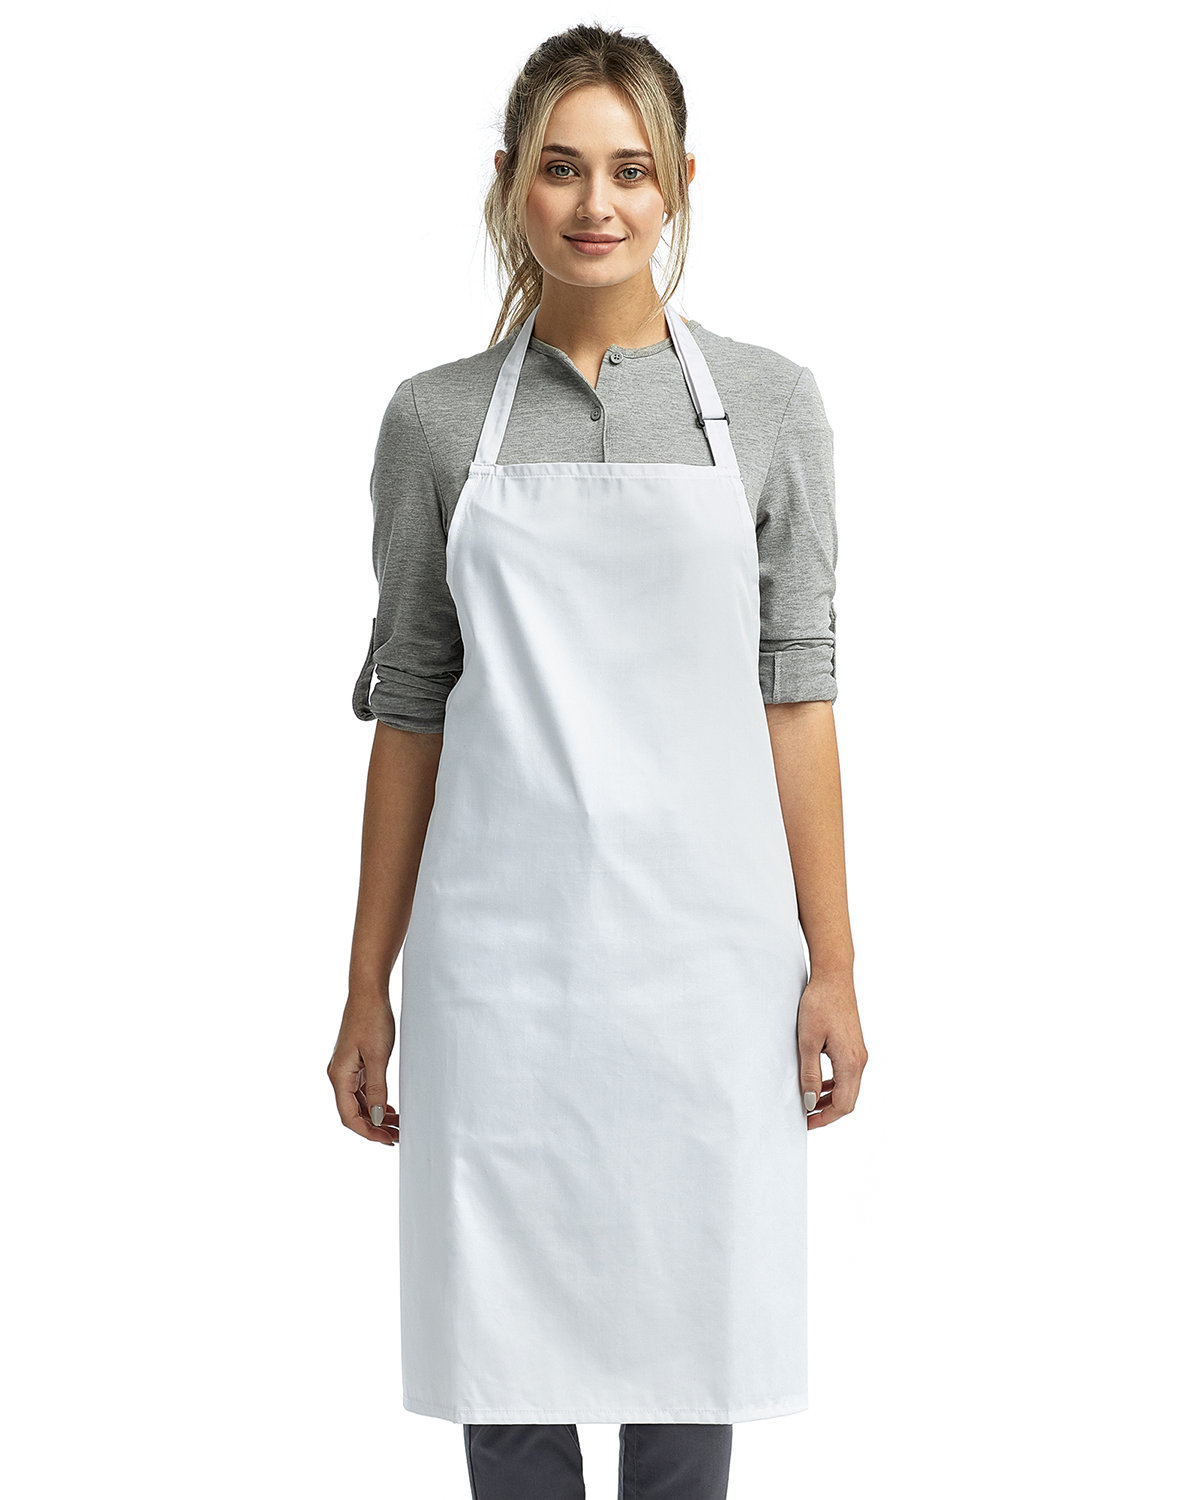 Artisan Collection by Reprime "Colours" Sustainable Bib Apron WHITE 